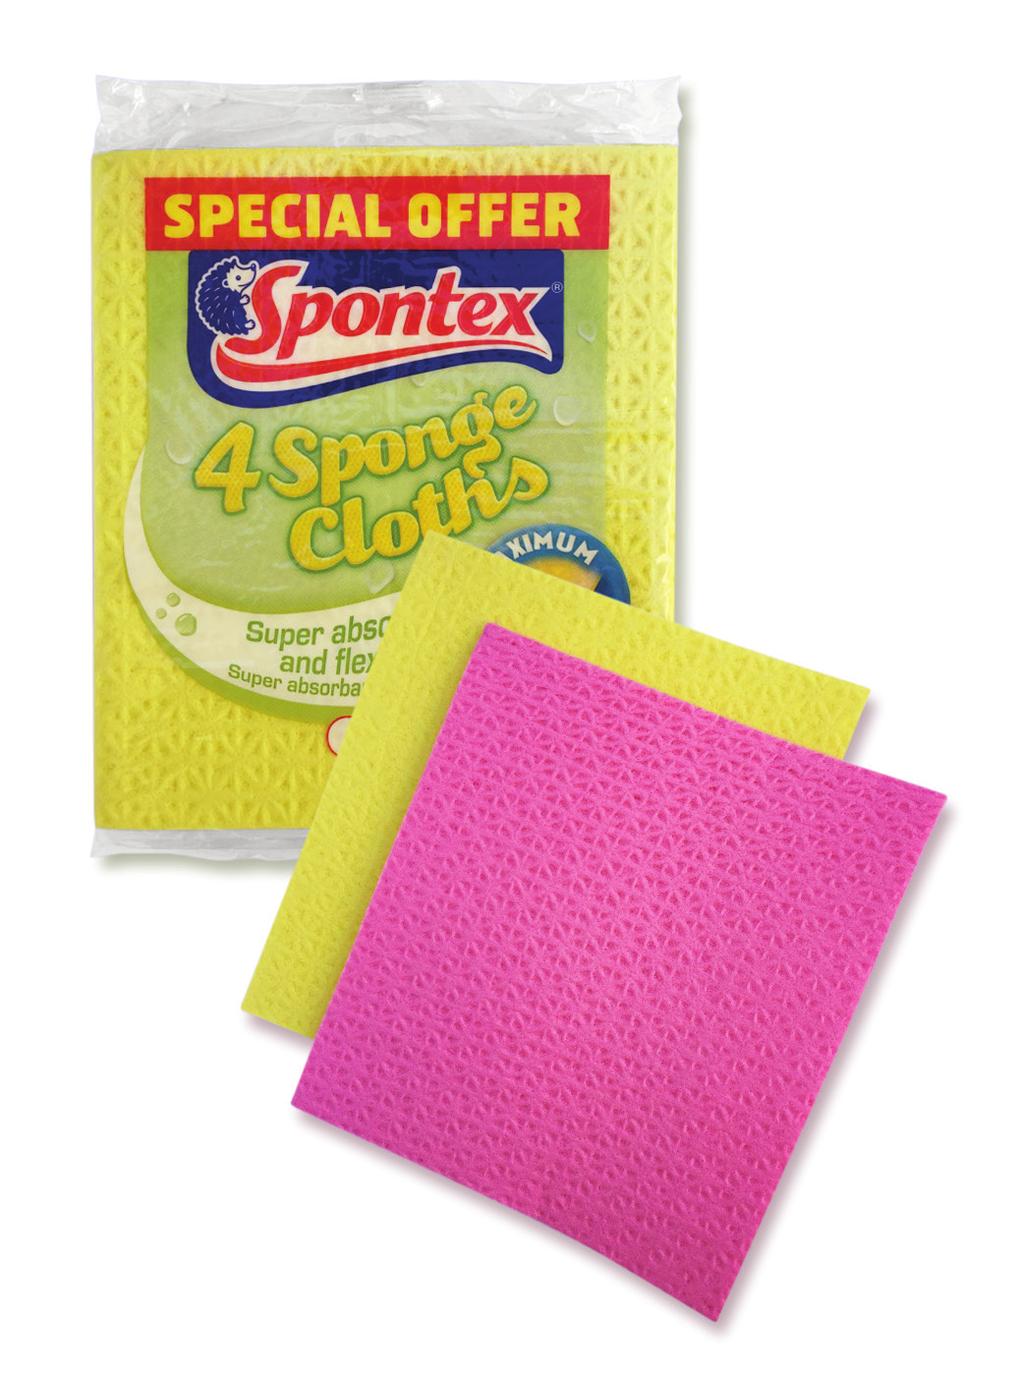 SPONGE VALUE PACK Includes One highly absorbant 27mm thick cellulose sponge able to absorb 20